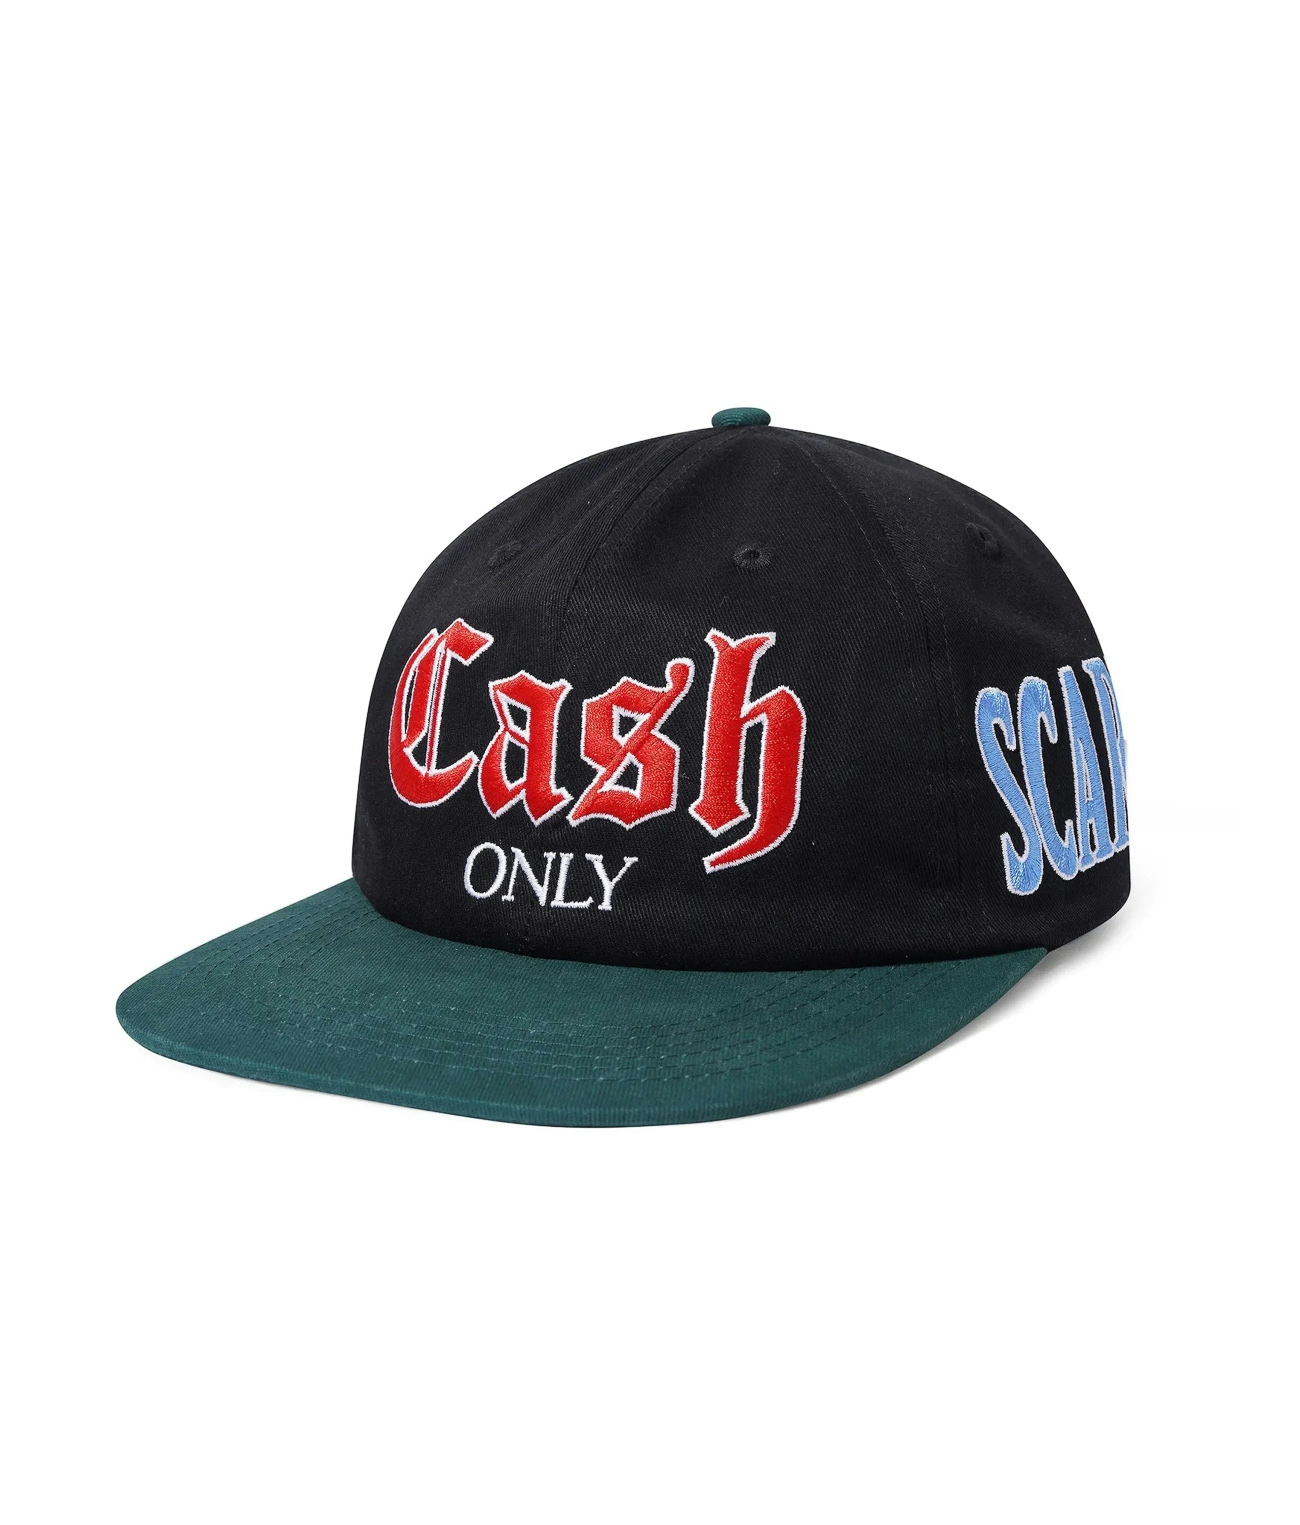 Cash Only Training 6 Panel Cap Black/Forest 1